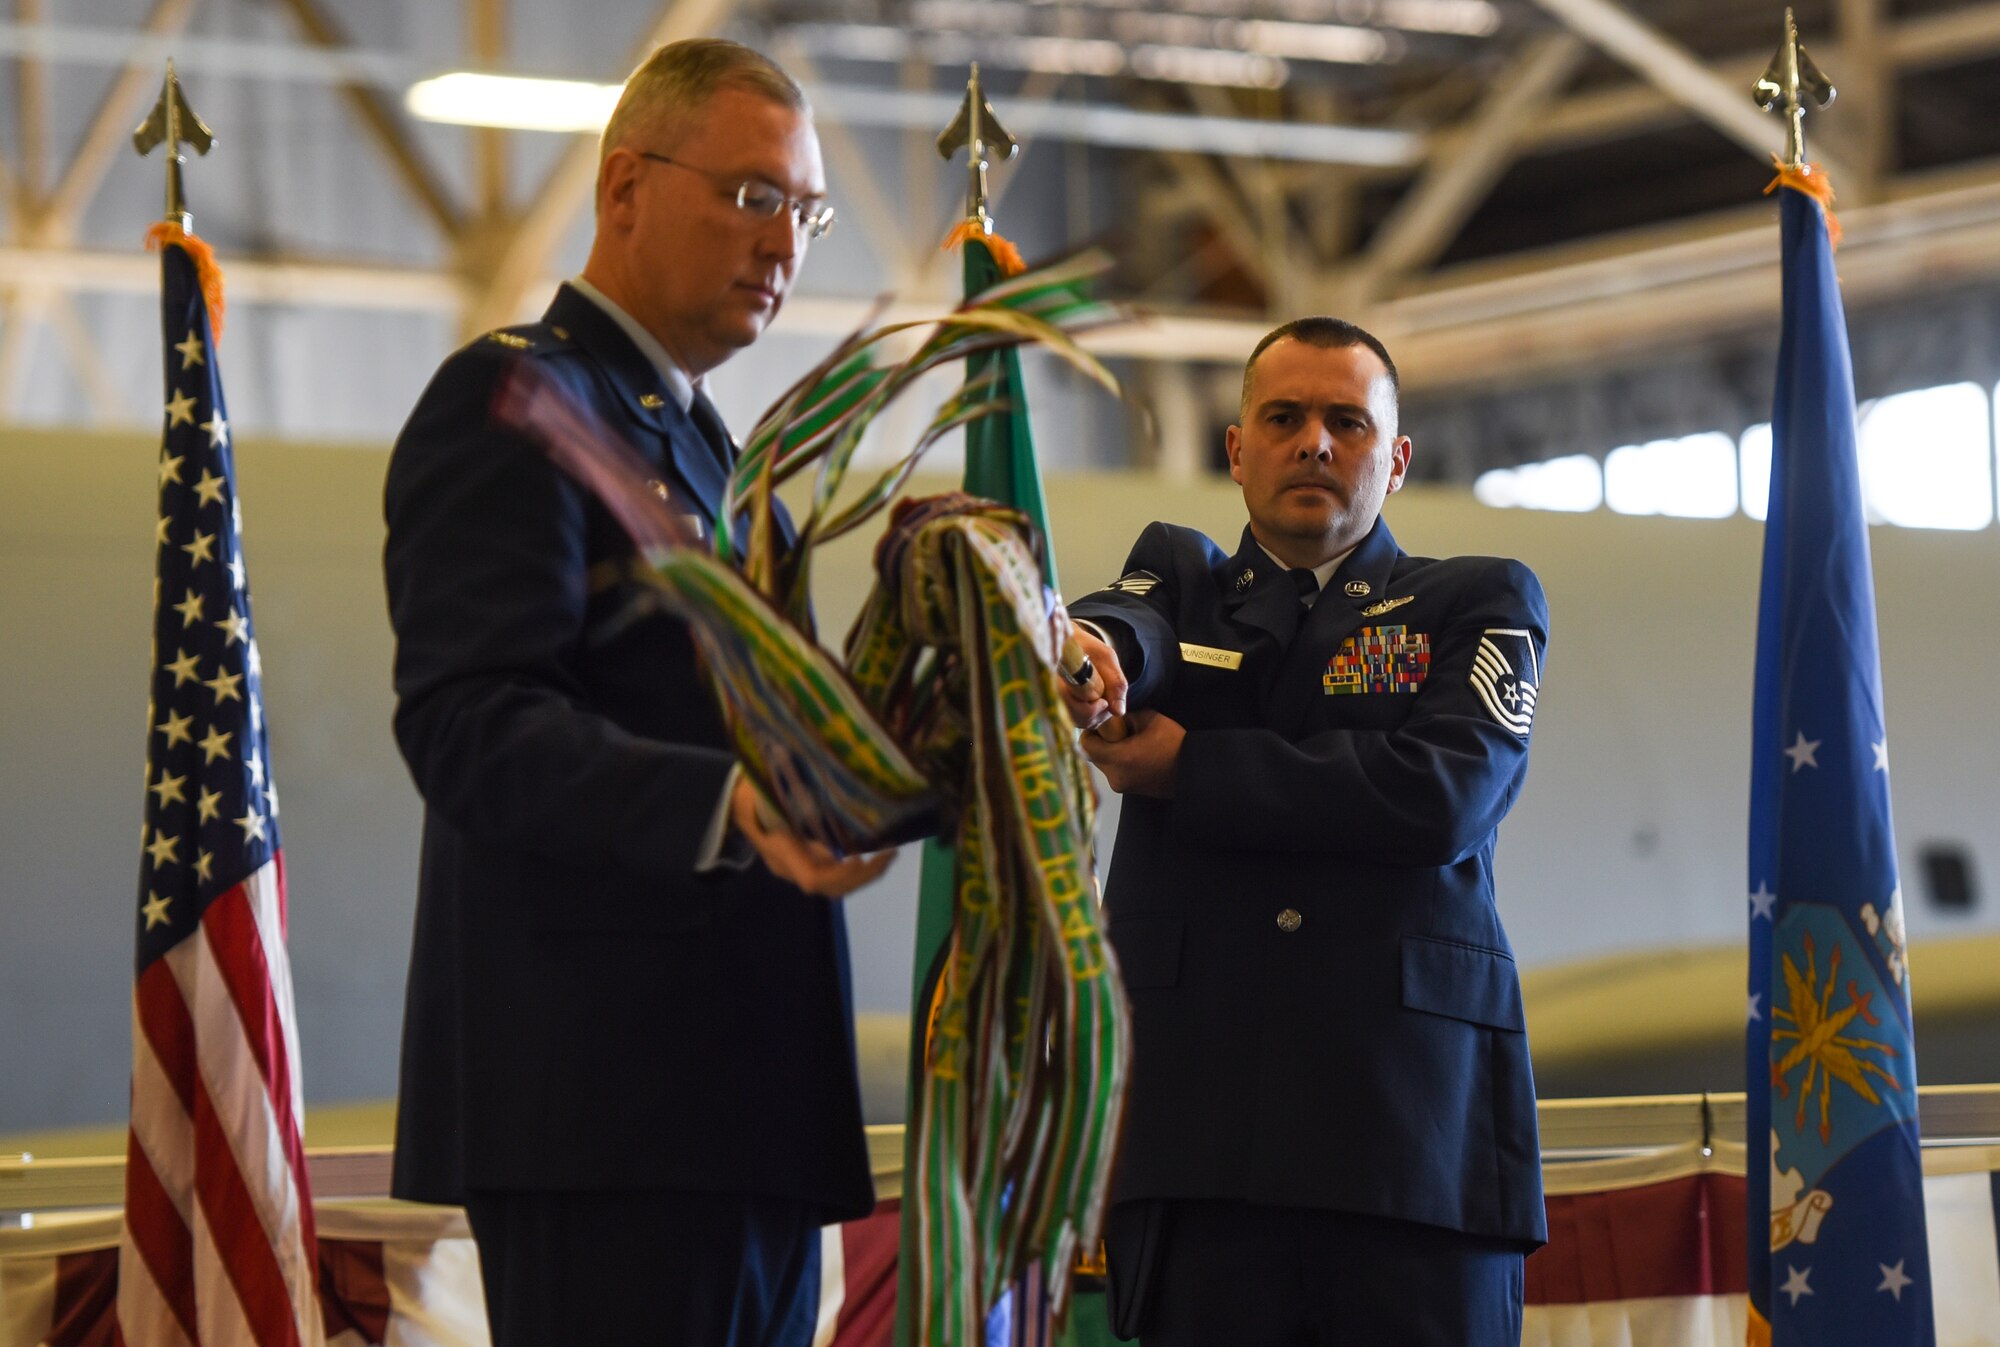 U.S. Air Force Master Sgt. Matthew Hunsinger, 97th Air Refueling Squadron superintendent, holds the squadron’s guidon as Col. Russel Davis, 92nd Operation Group commander, unrolls it during the 97th Air Refueling Squadron’s reactivation ceremony and Assumption of Command at Fairchild Air Force Base, Washington Oct. 18, 2019.